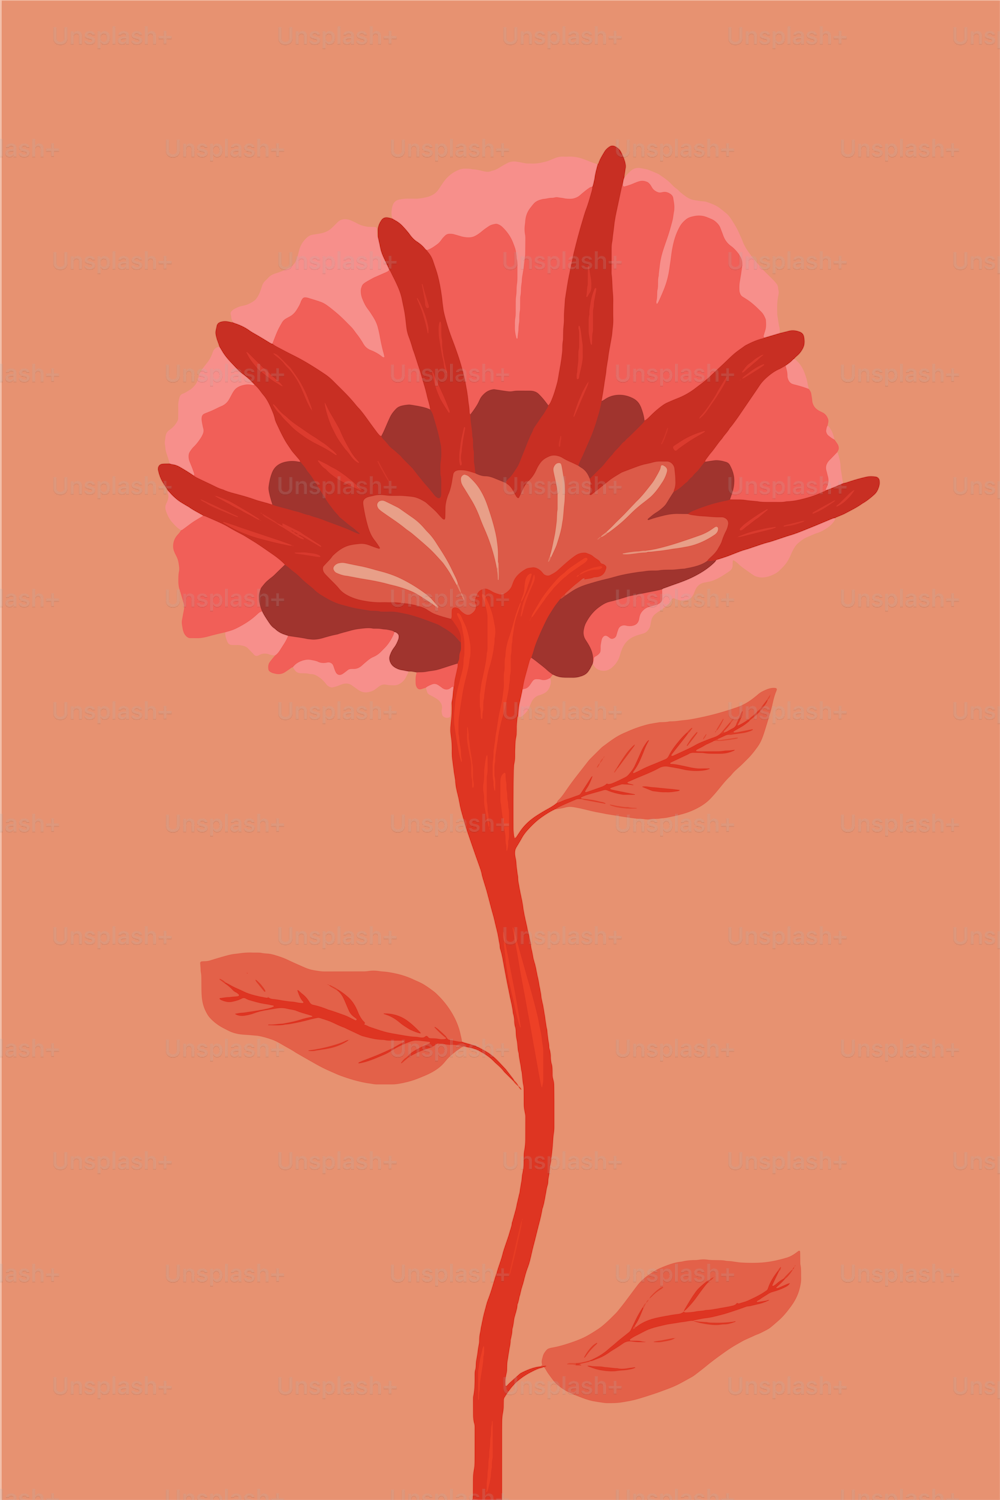 Flower isolated on peach background